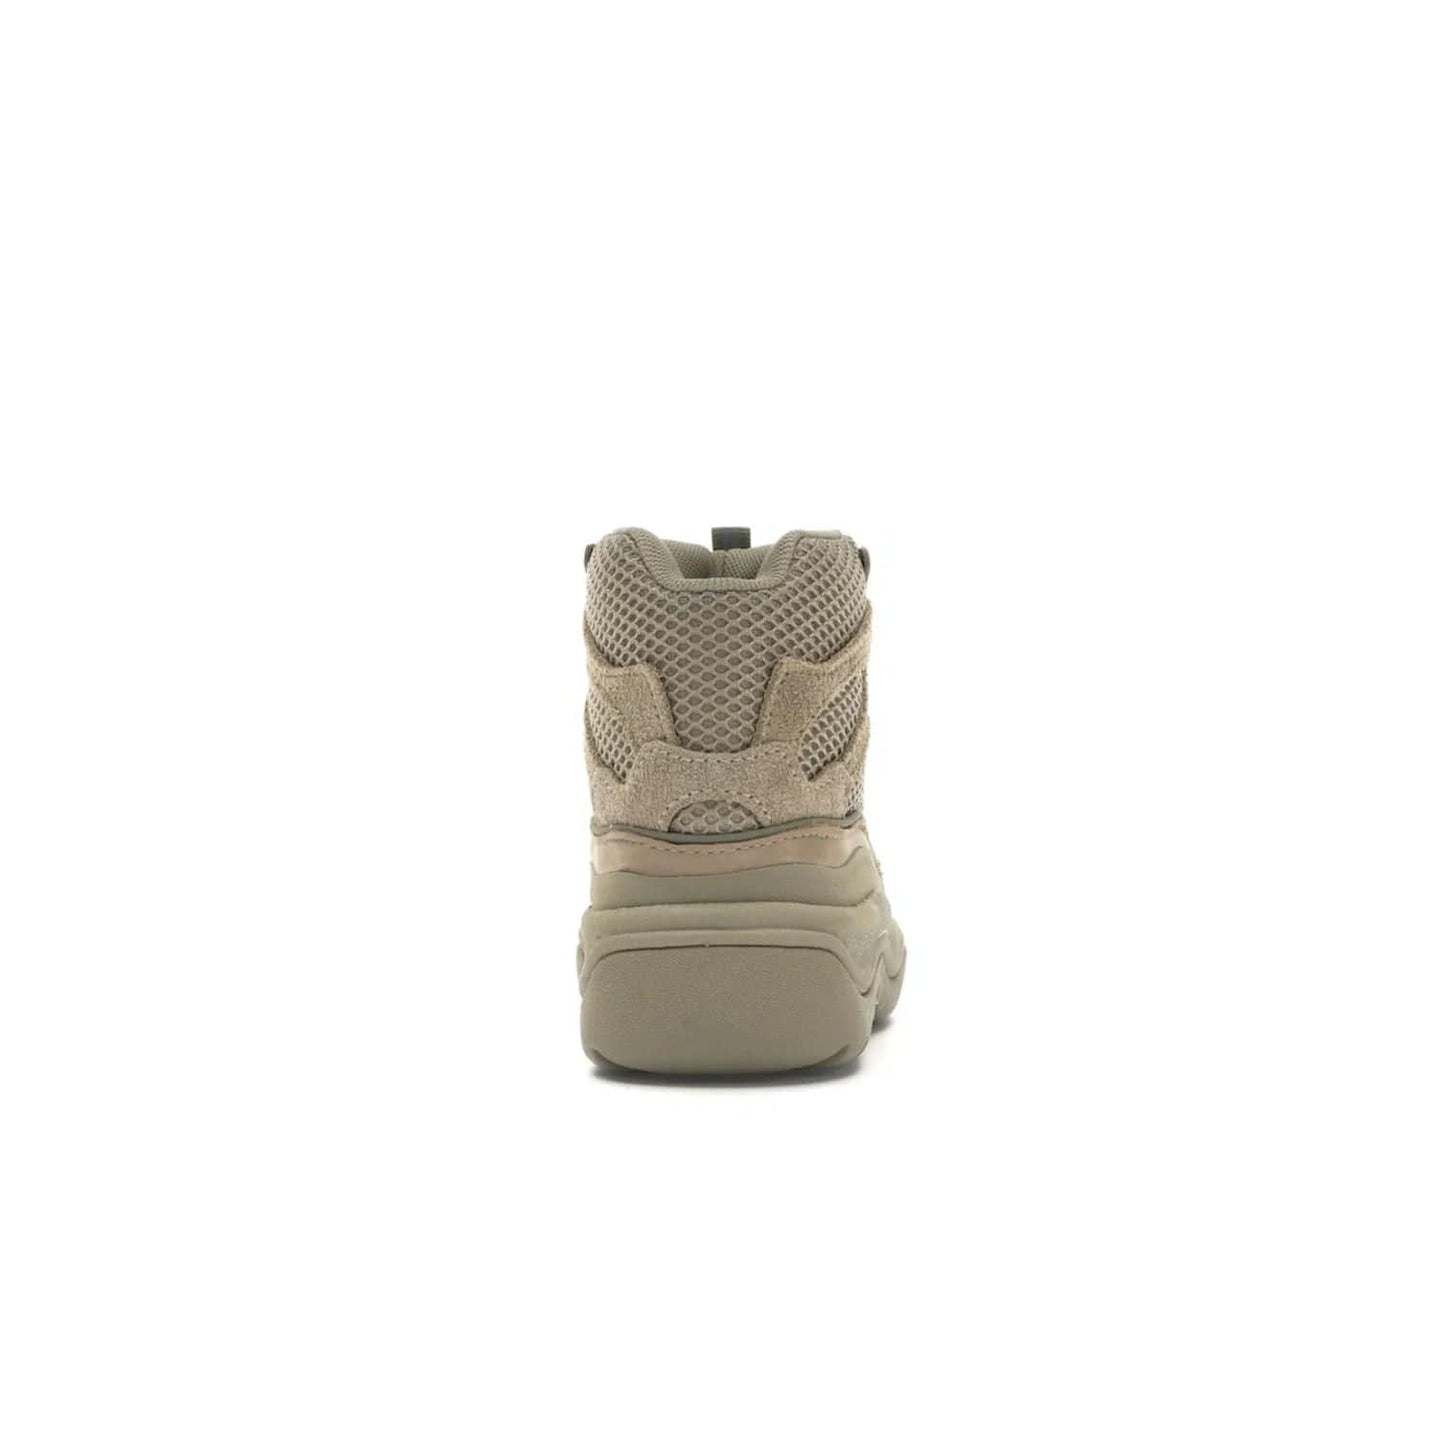 adidas Yeezy Desert Boot Rock (Kids) - Image 28 - Only at www.BallersClubKickz.com - Elevate your style this season with the adidas Yeezy Desert Boot Rock. Crafted from layered nylon and suede, this chic kids' silhouette features an EVA midsole and rubber outsole for superior cushioning and traction.